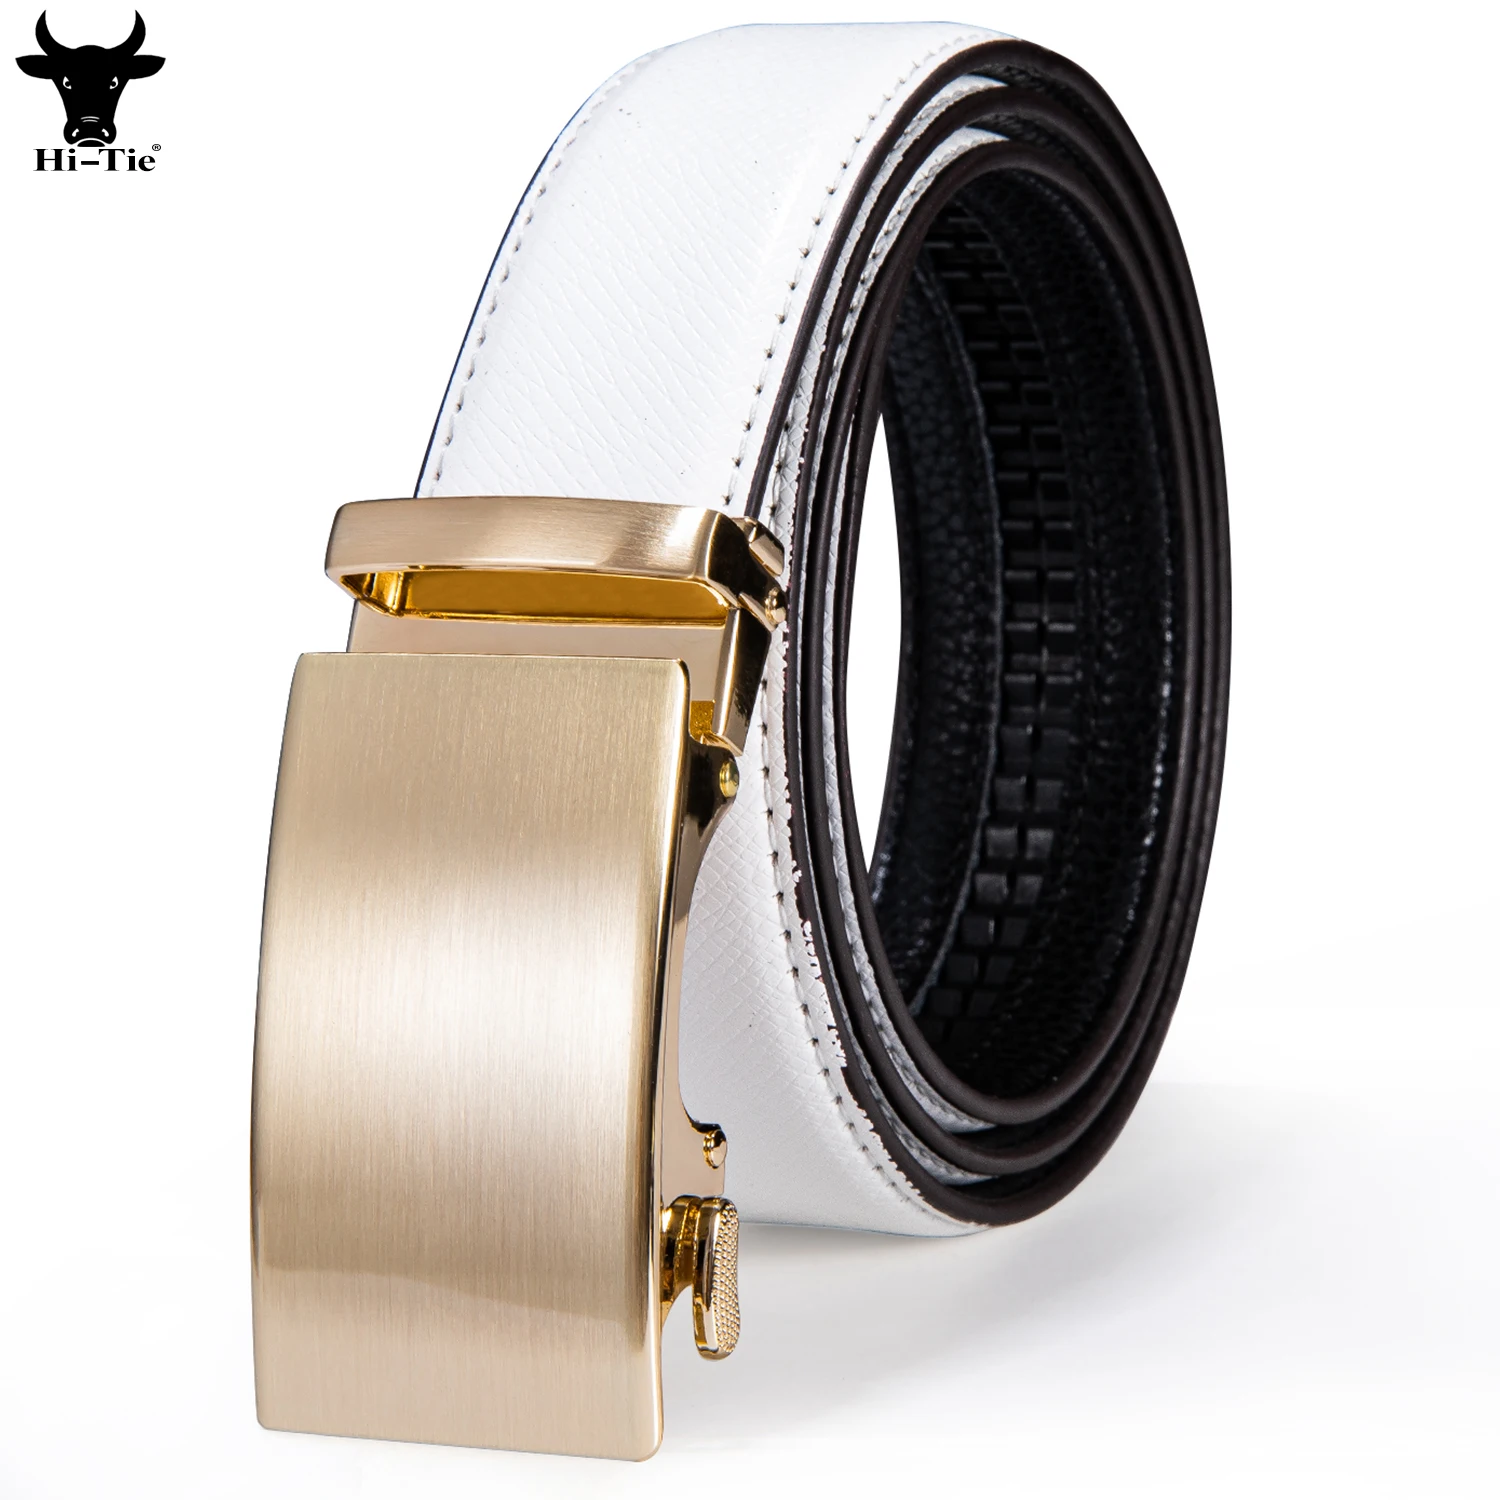 Hi-Tie Gold Smooth Automatic Buckles Mens Belts White Genuine Leather Ratchet Waistband Belt for Men Dress Jeans Suit Wedding XL